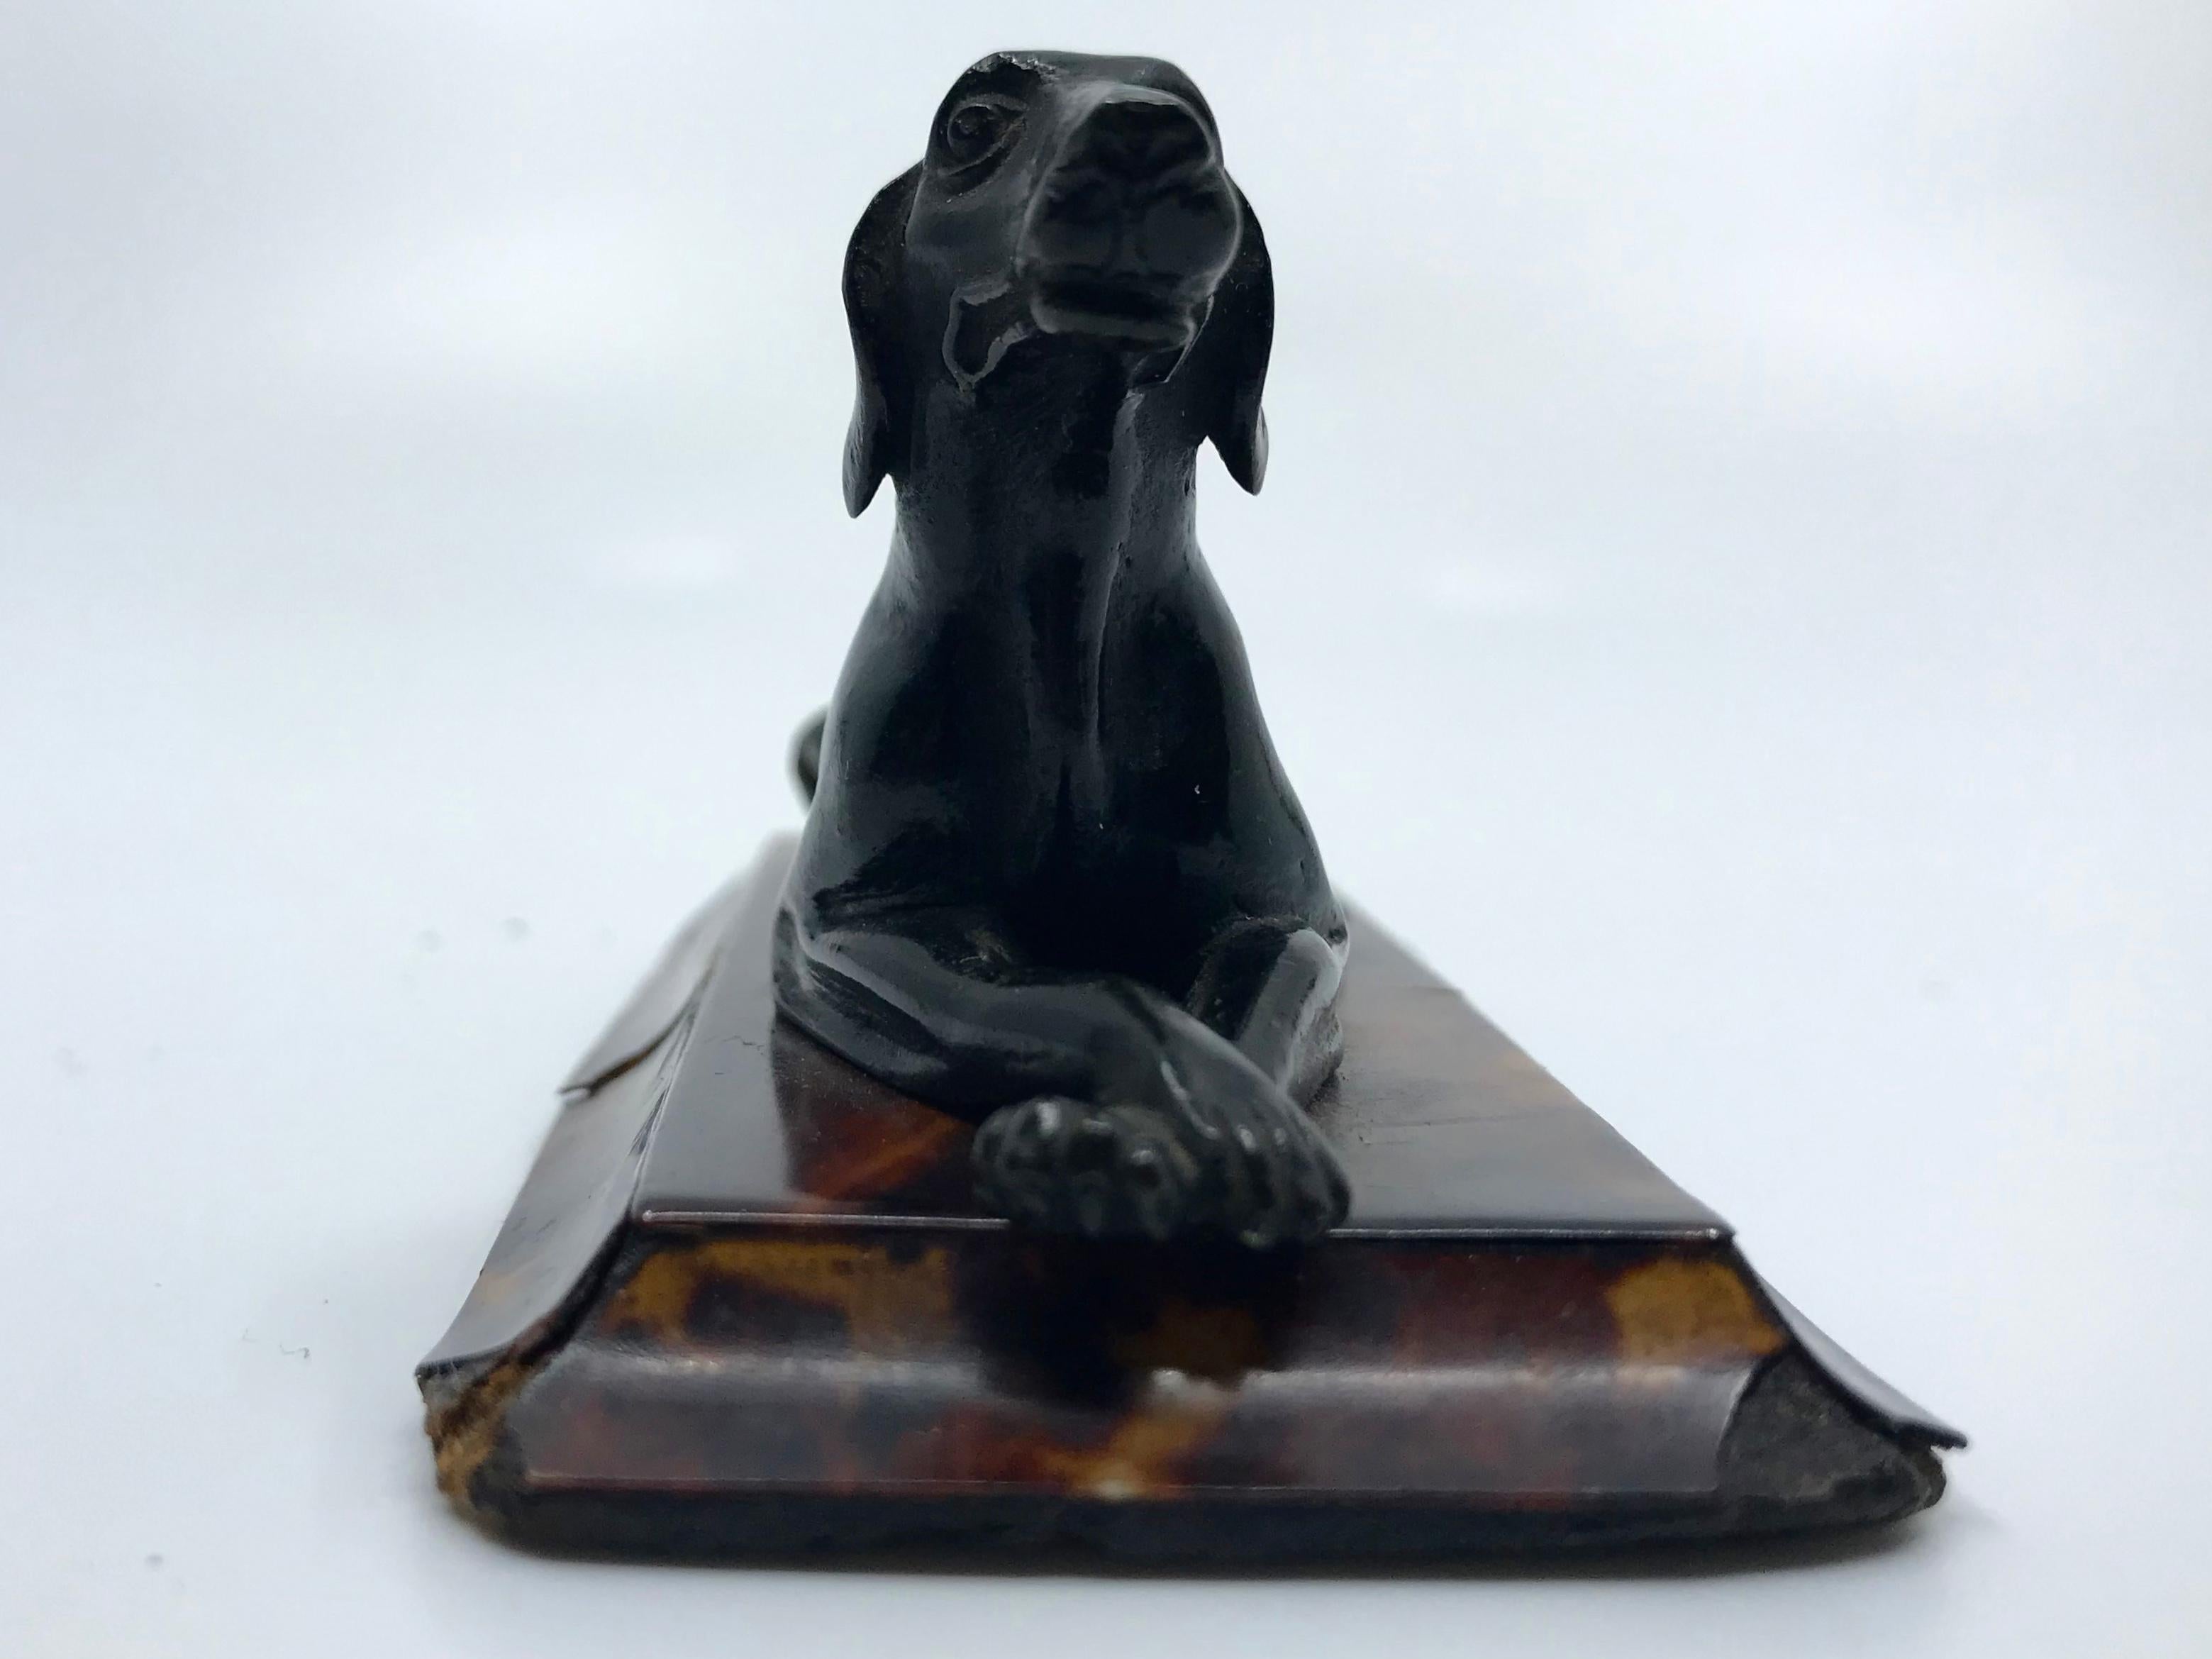 Regency bronze hound dog sculpture on tortoiseshell base. English bronze hunting dog sculpture on original low sculpted plinth base sheathed in tortoiseshell, England, 1820’s.
Dimensions: 4.38” W x 2.13